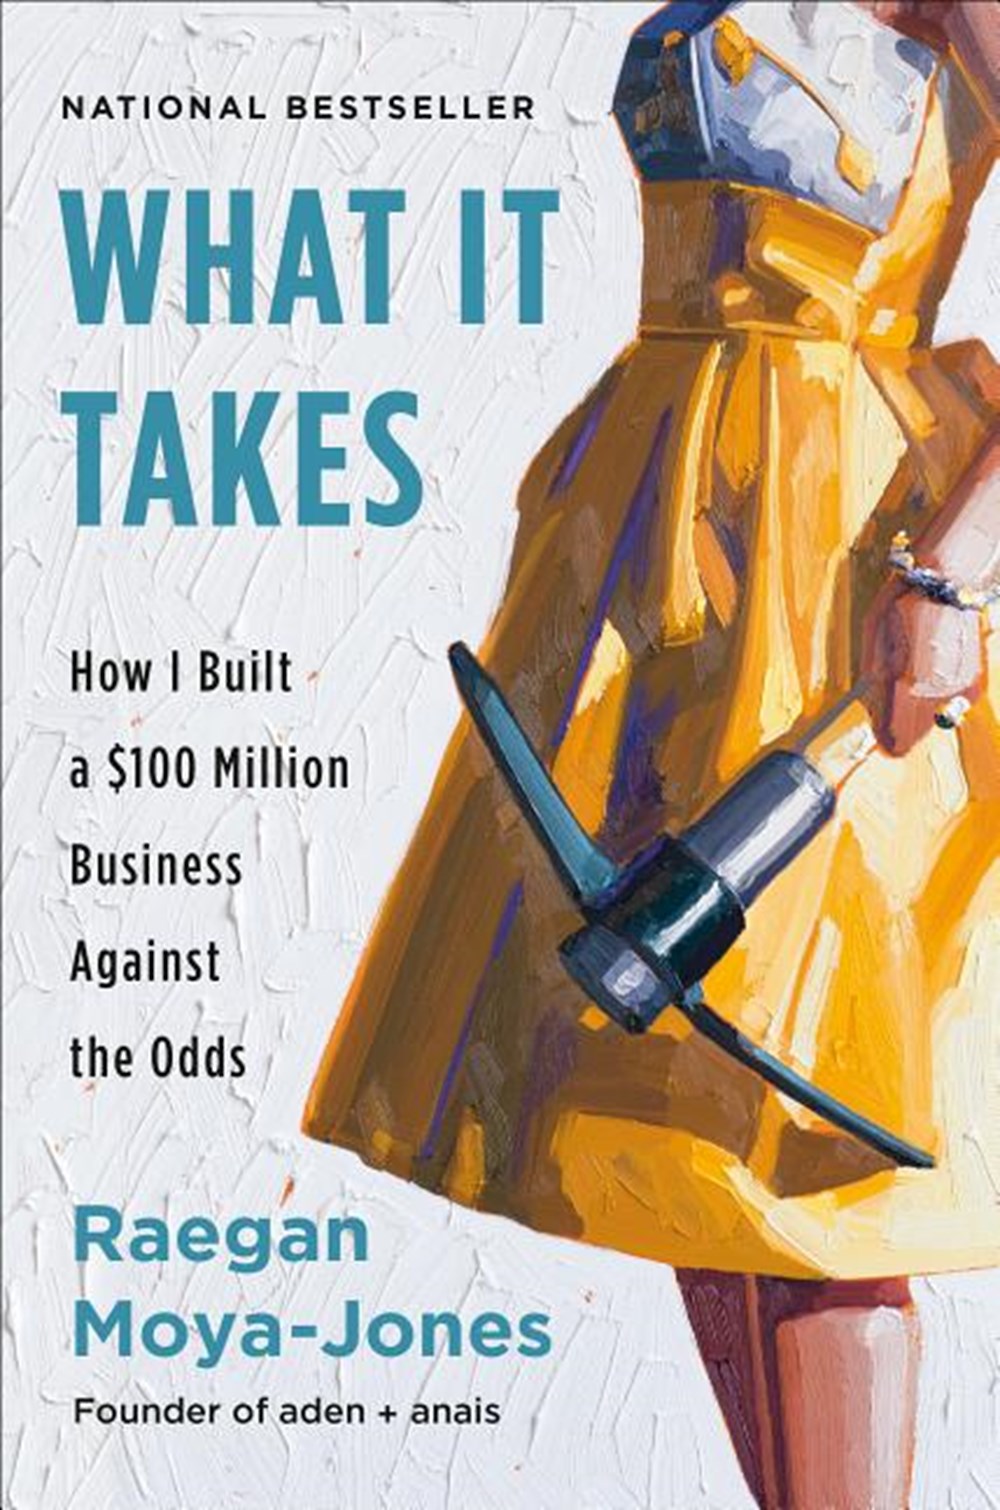 What It Takes: How I Built a $100 Million Business Against the Odds